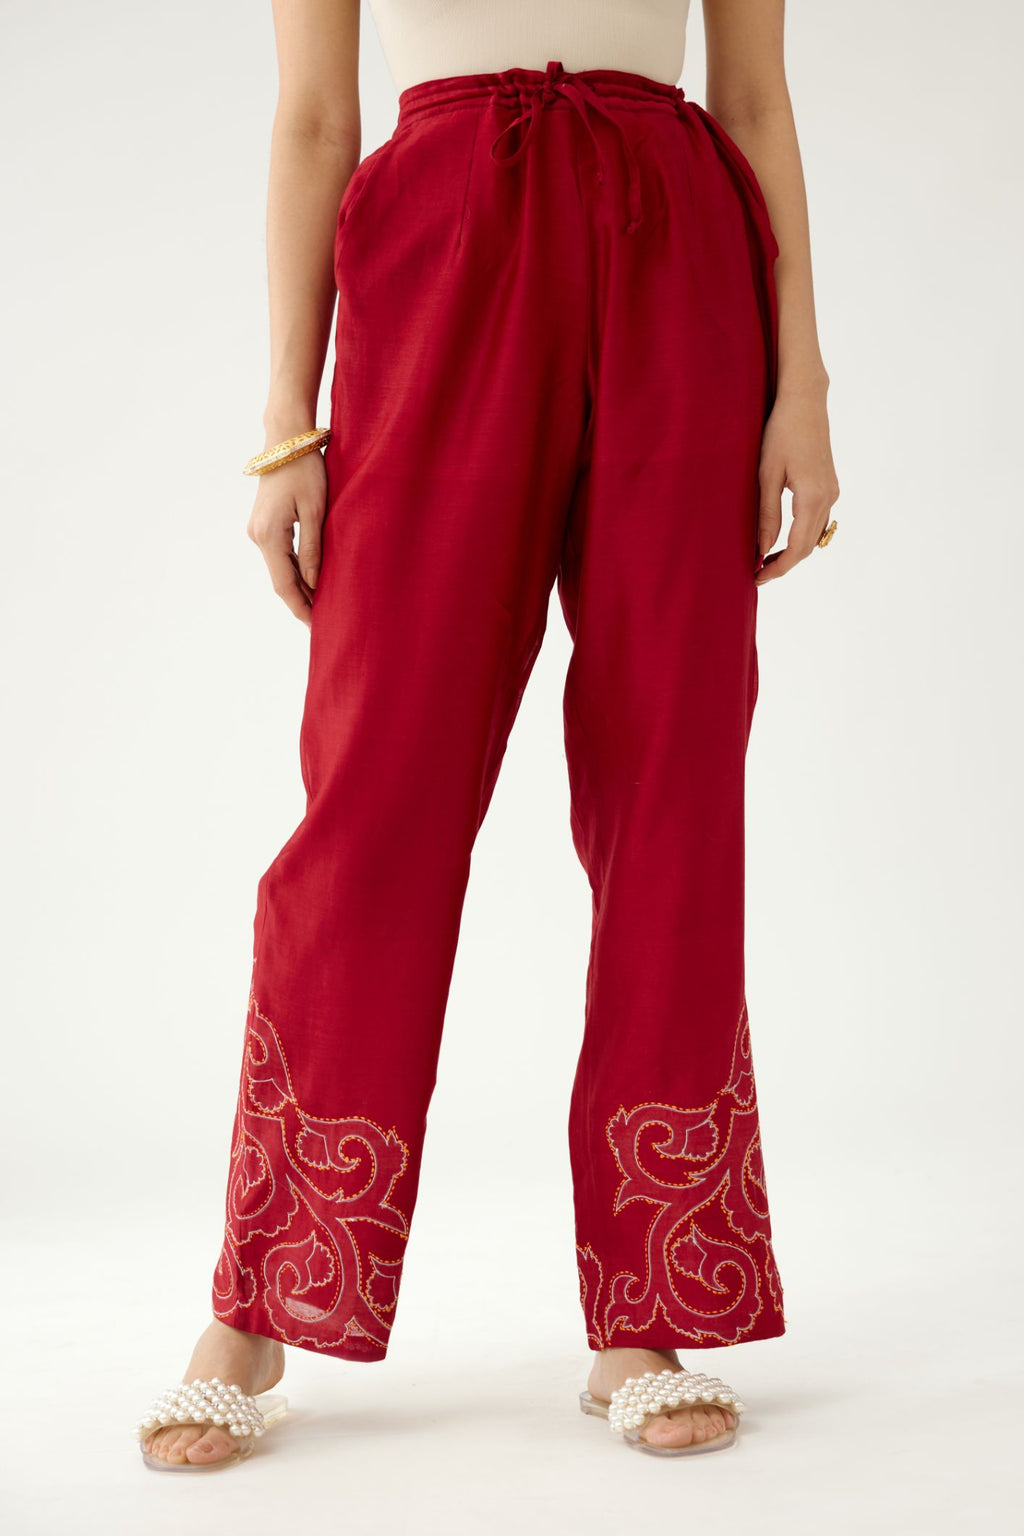 Red silk chanderi straight pants with cotton appliqué jaal work at reverse side, highlighted with kantha work in front side at bottom hem.